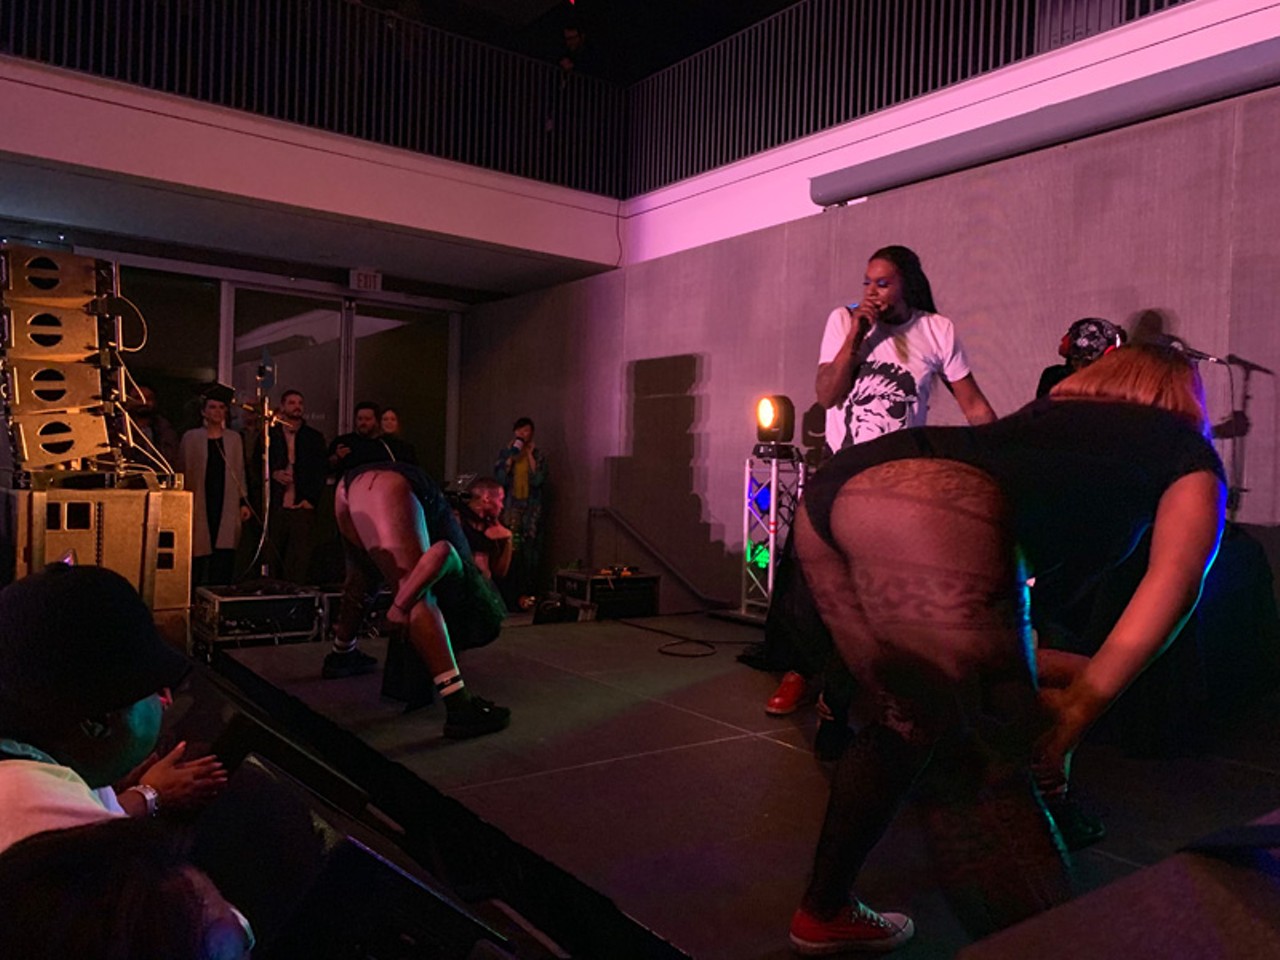 The Big Freedia Concert at CAM was Ass-tastic